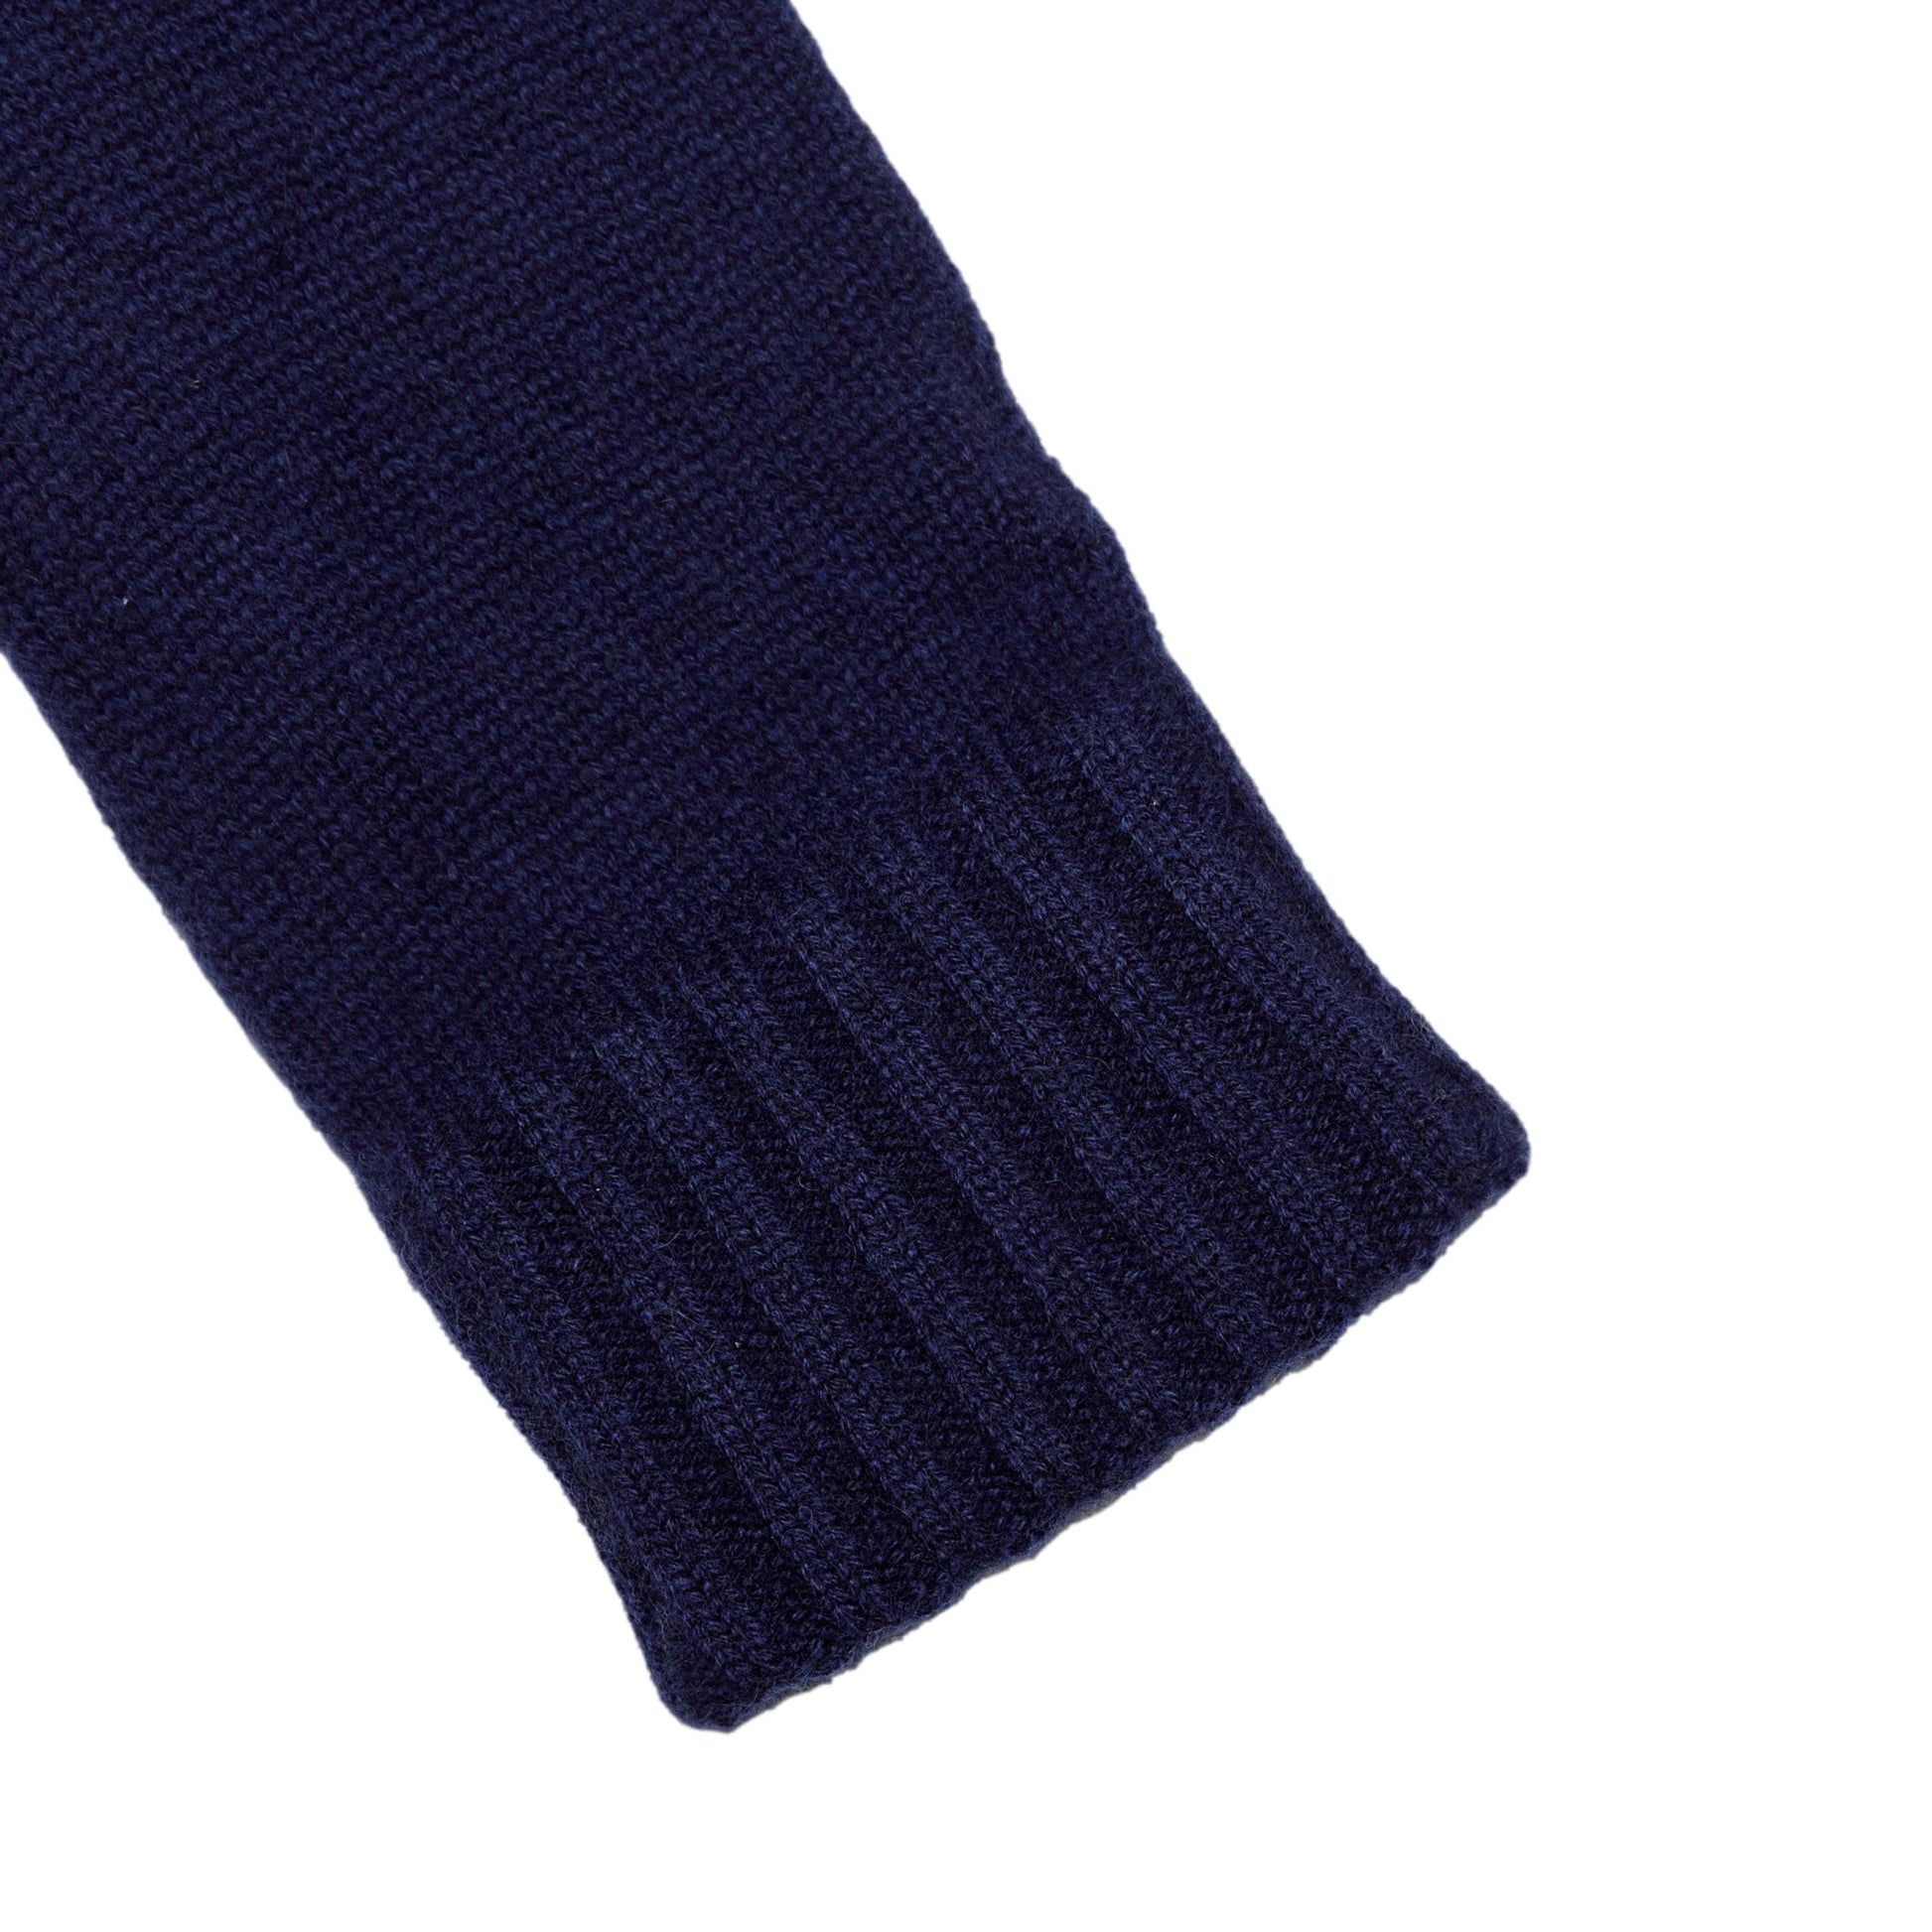 Men's natural blue cashmere gloves with chrome-free leather palm patch detail